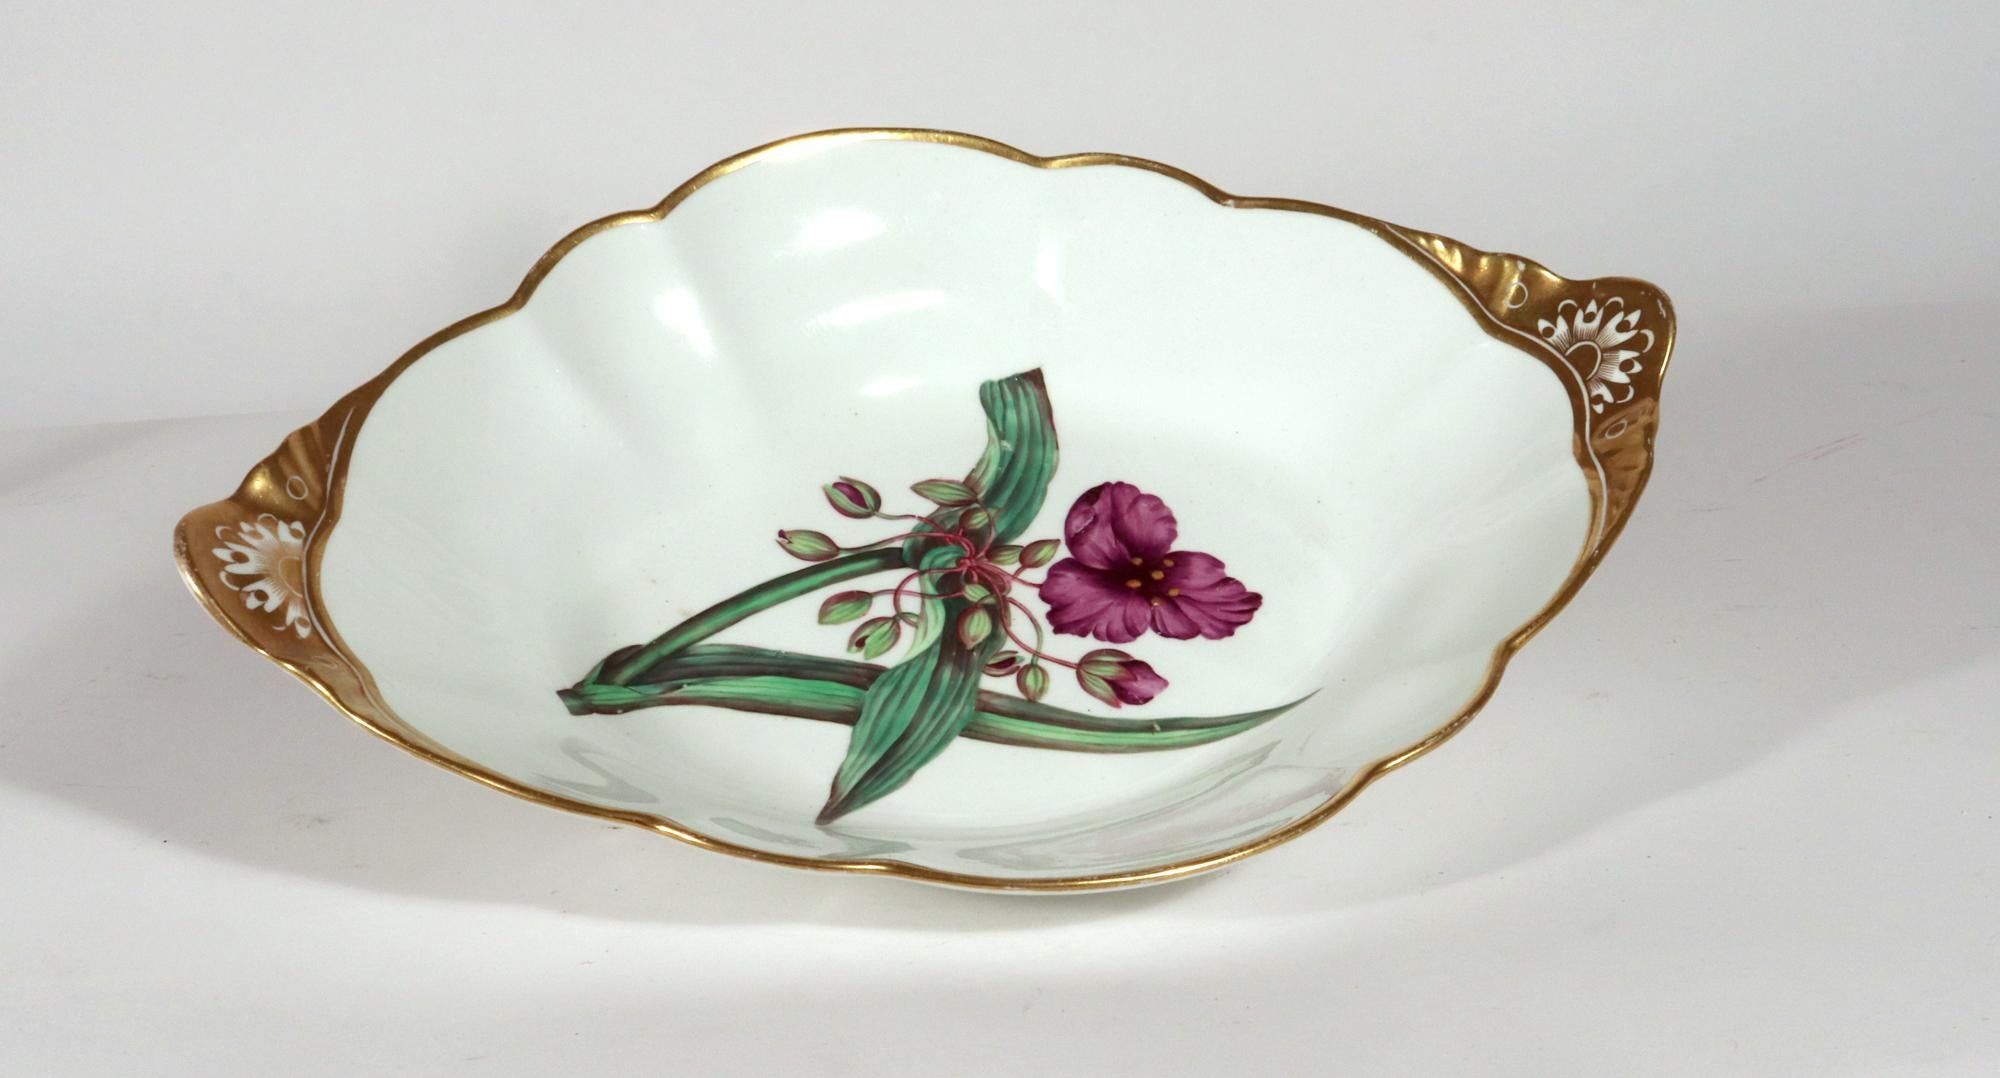 Spode Porcelain Botanical Specimen Dish with a Spiderwort Plant after W. Curtis In Good Condition For Sale In Downingtown, PA